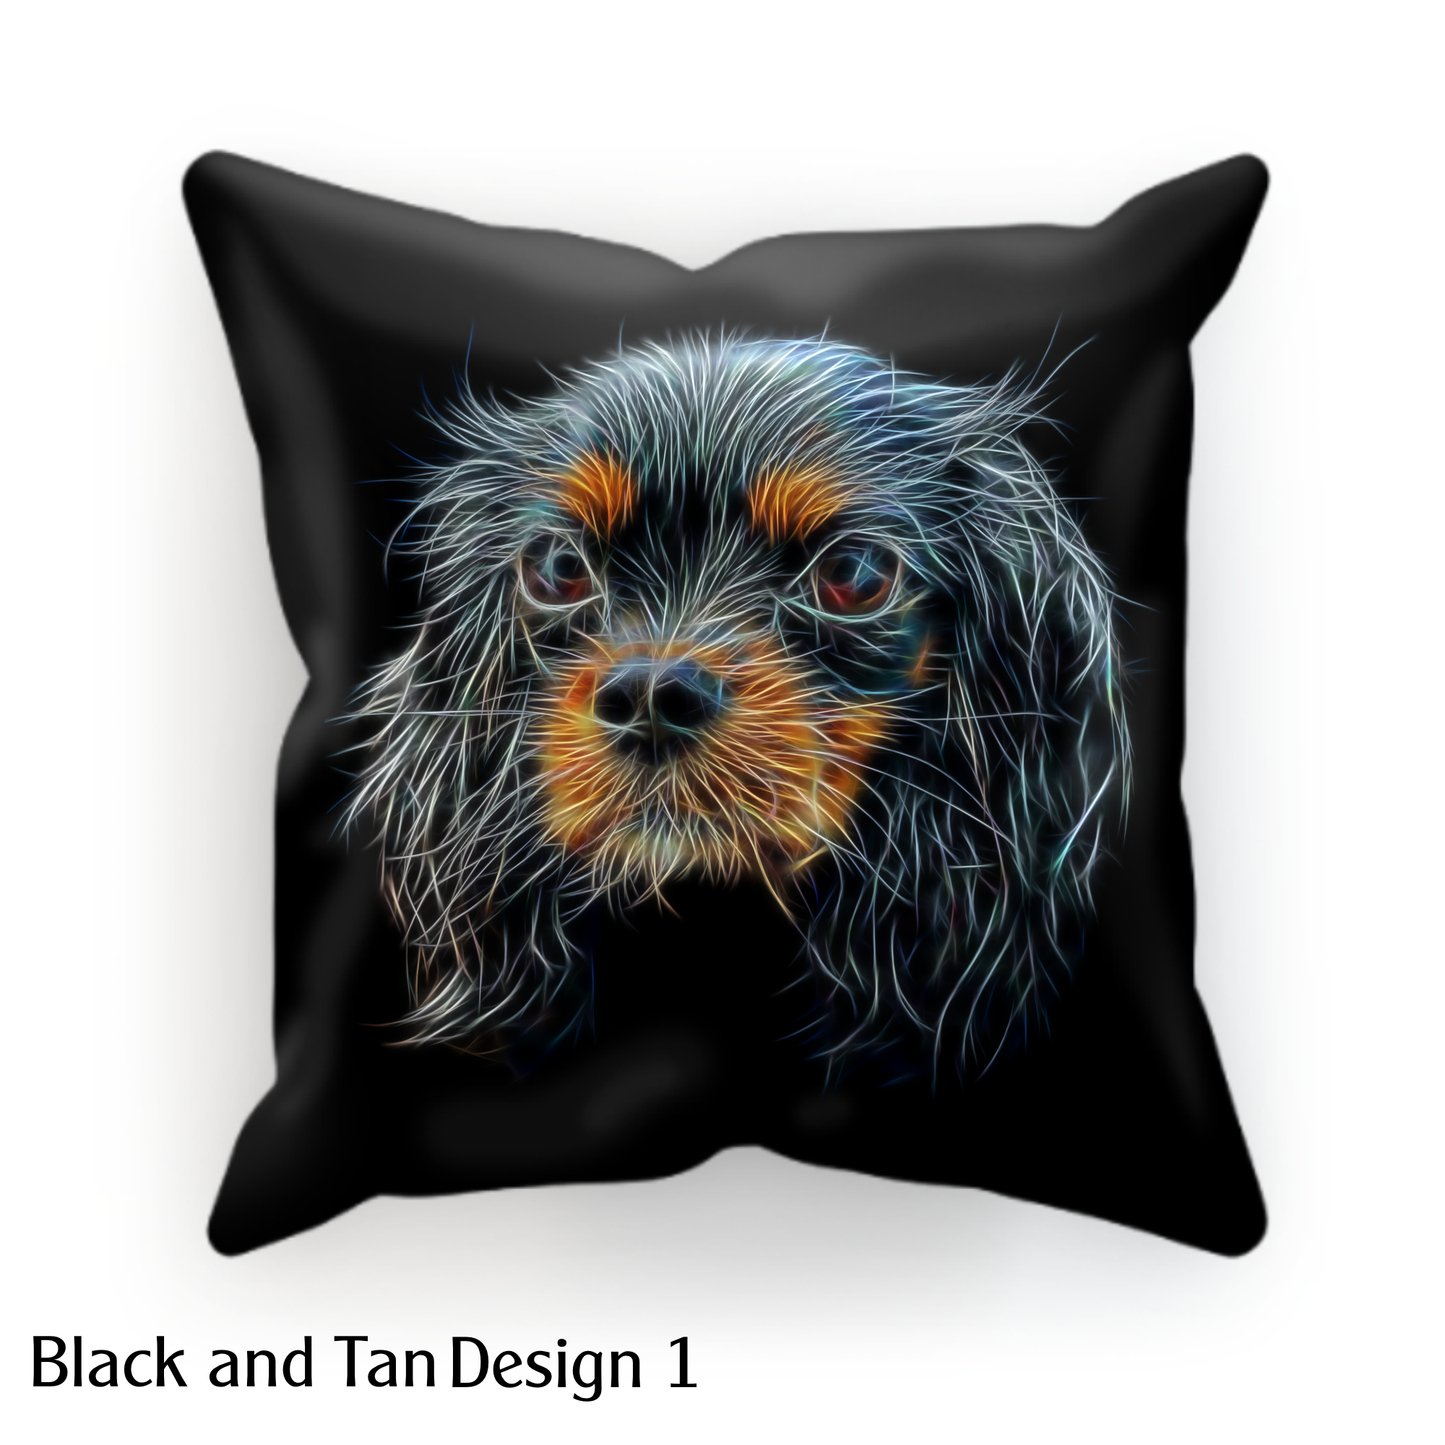 Black and Tan King Charles Spaniel Cushion with Pillow Insert